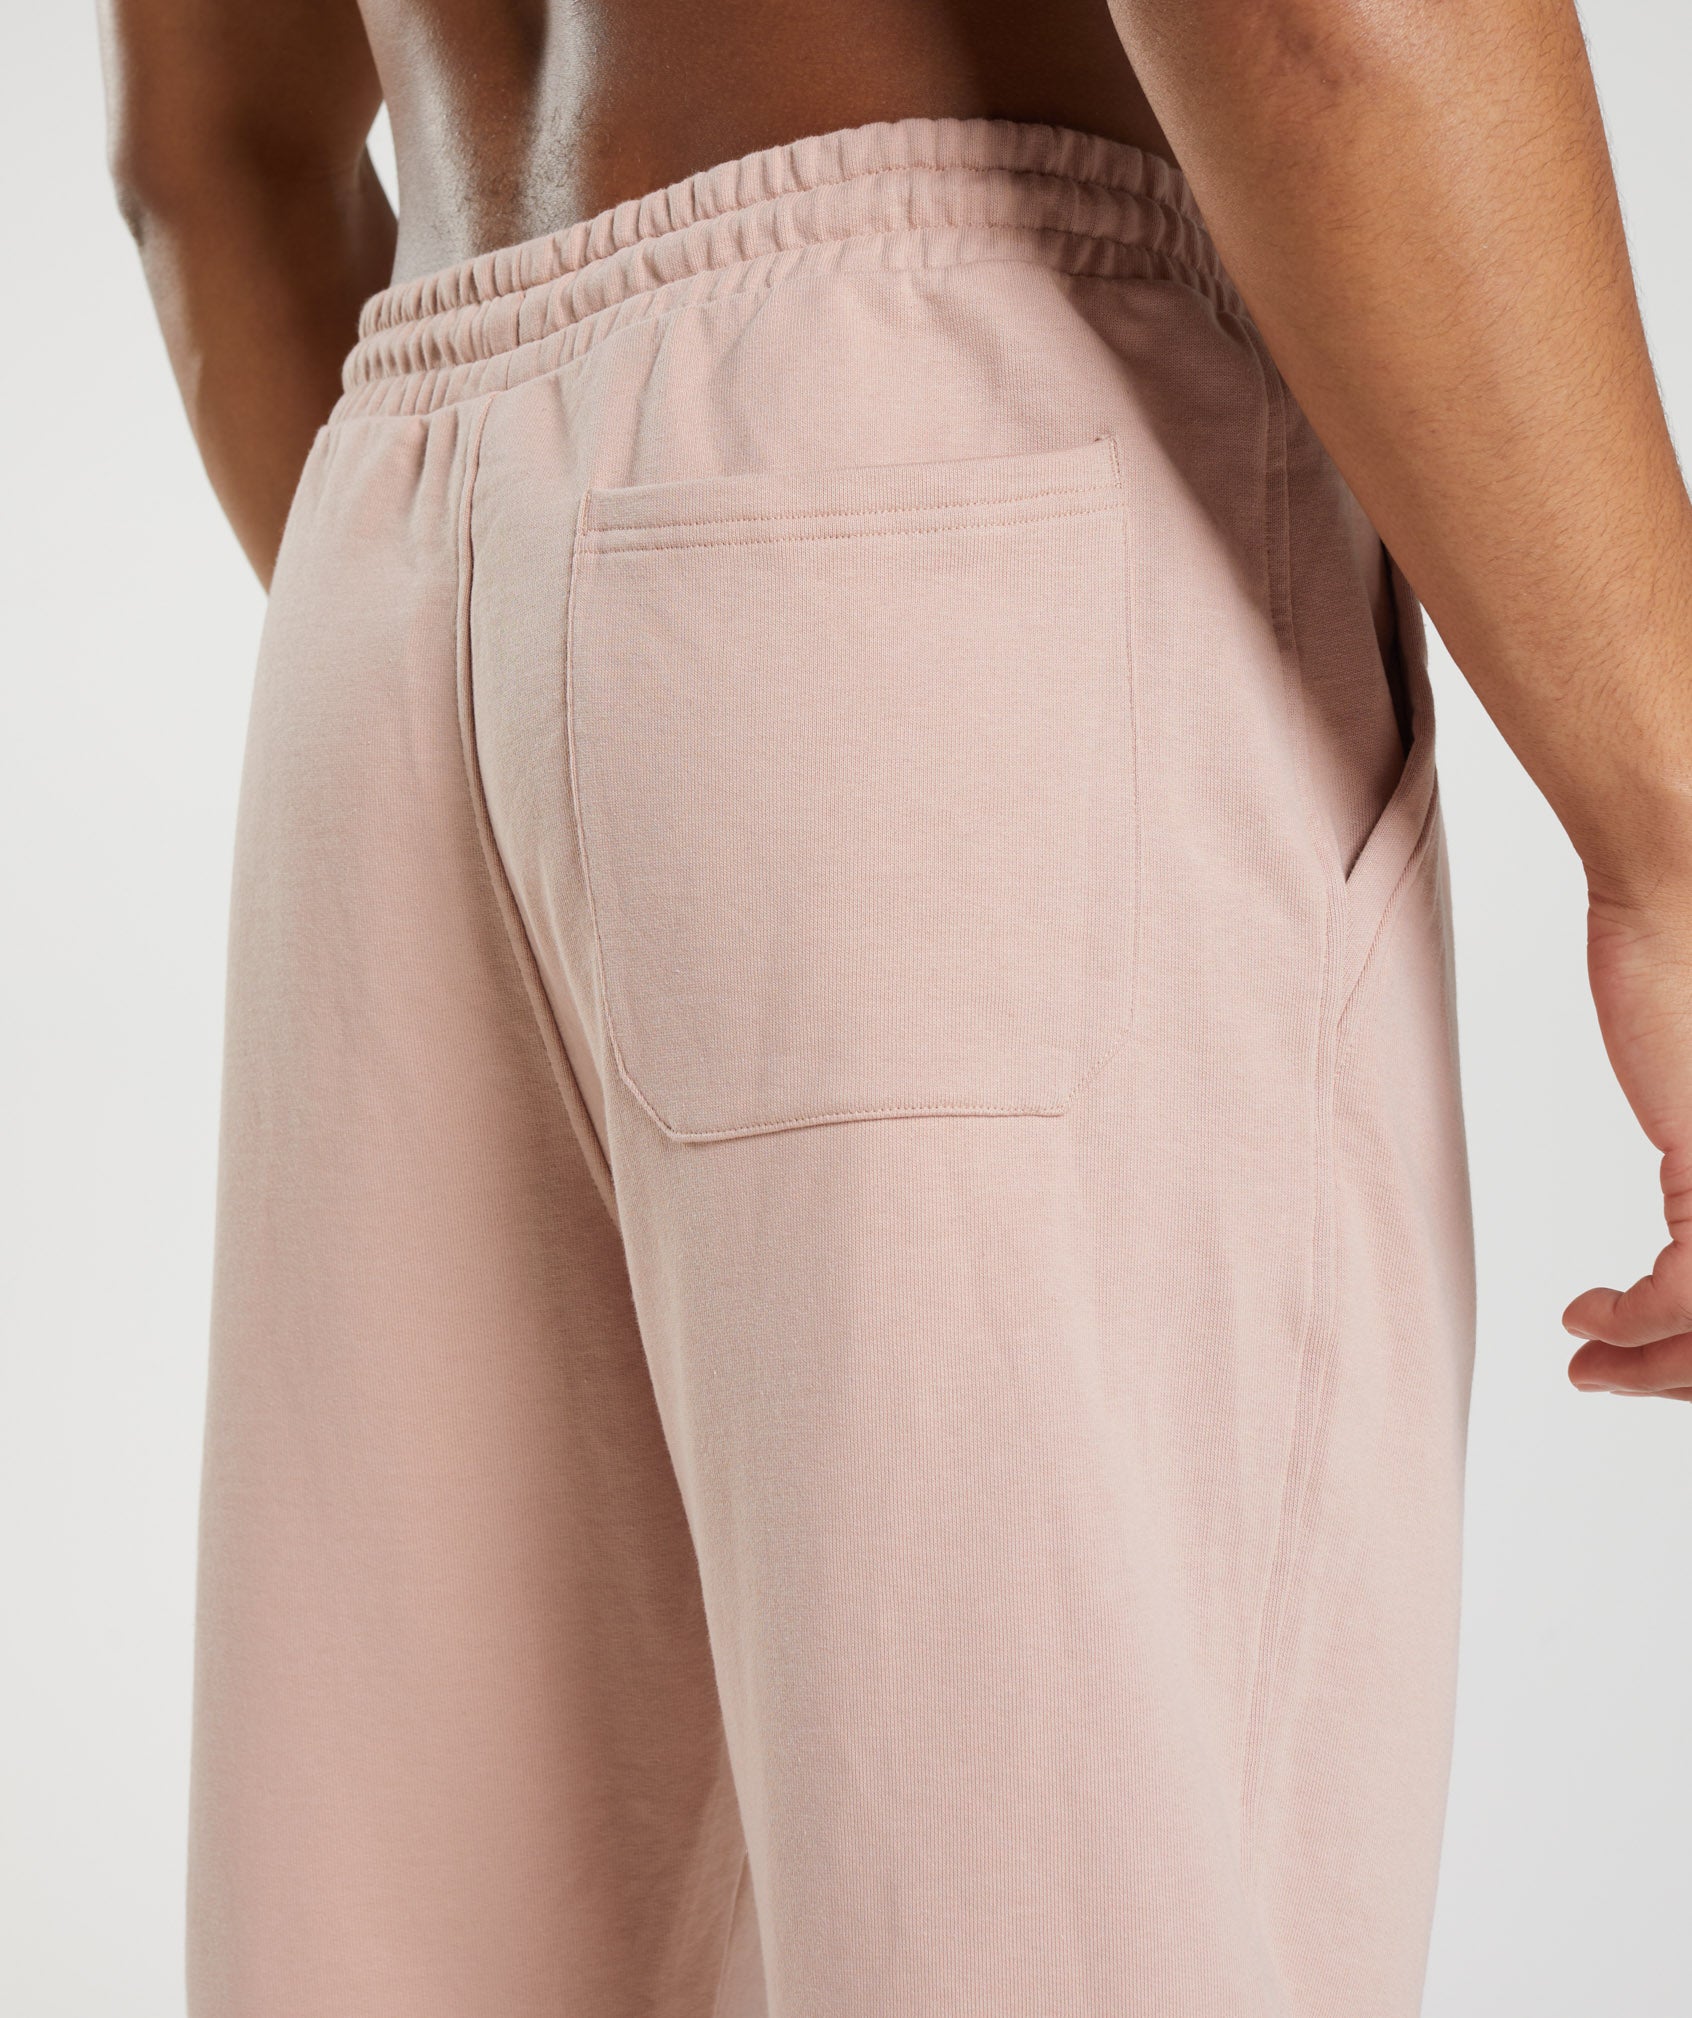 Rest Day Sweats Joggers in Dusty Taupe - view 7